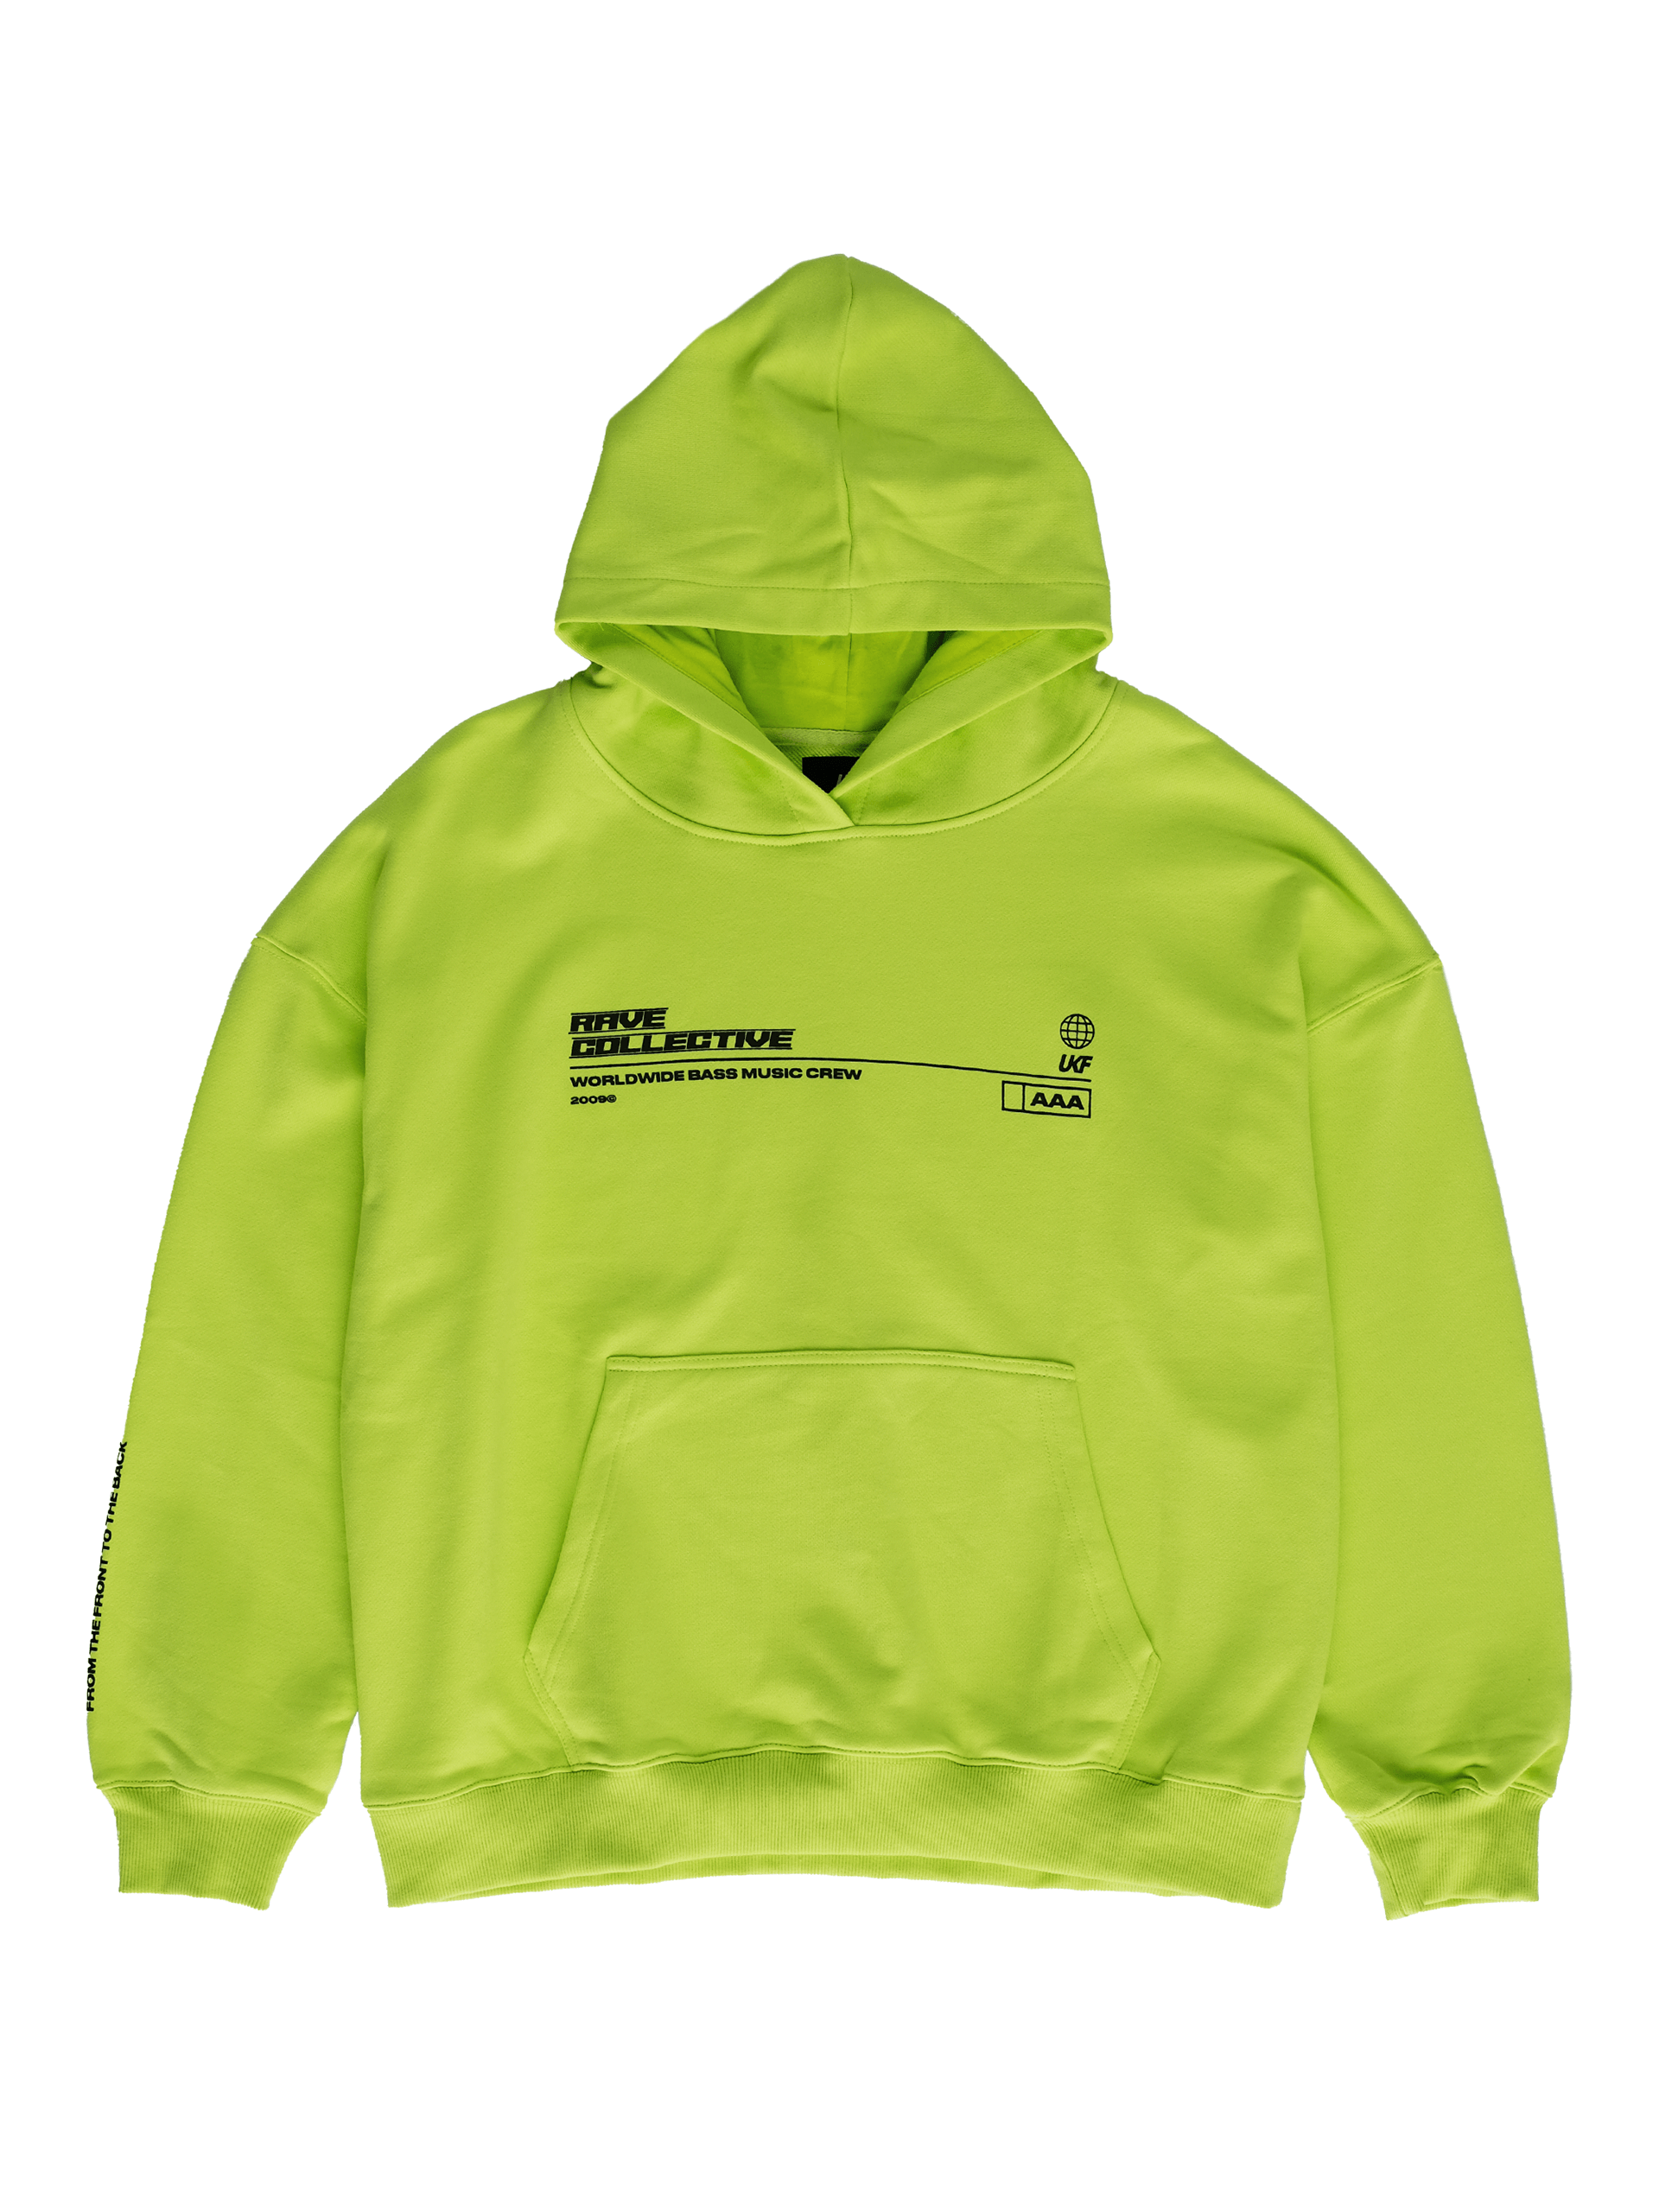 Rave Collective Green Hoodie - Green hoodie features black screen print across the best, with the lettering "RAVE COLLECTIVE", "WORLDWIDE BASS MUSIC CREW", "AAA Pass", "UKF", an image of an outlined globe, and the year "2009". On the forearm there is a black screen print with the lettering "From the front to the back"